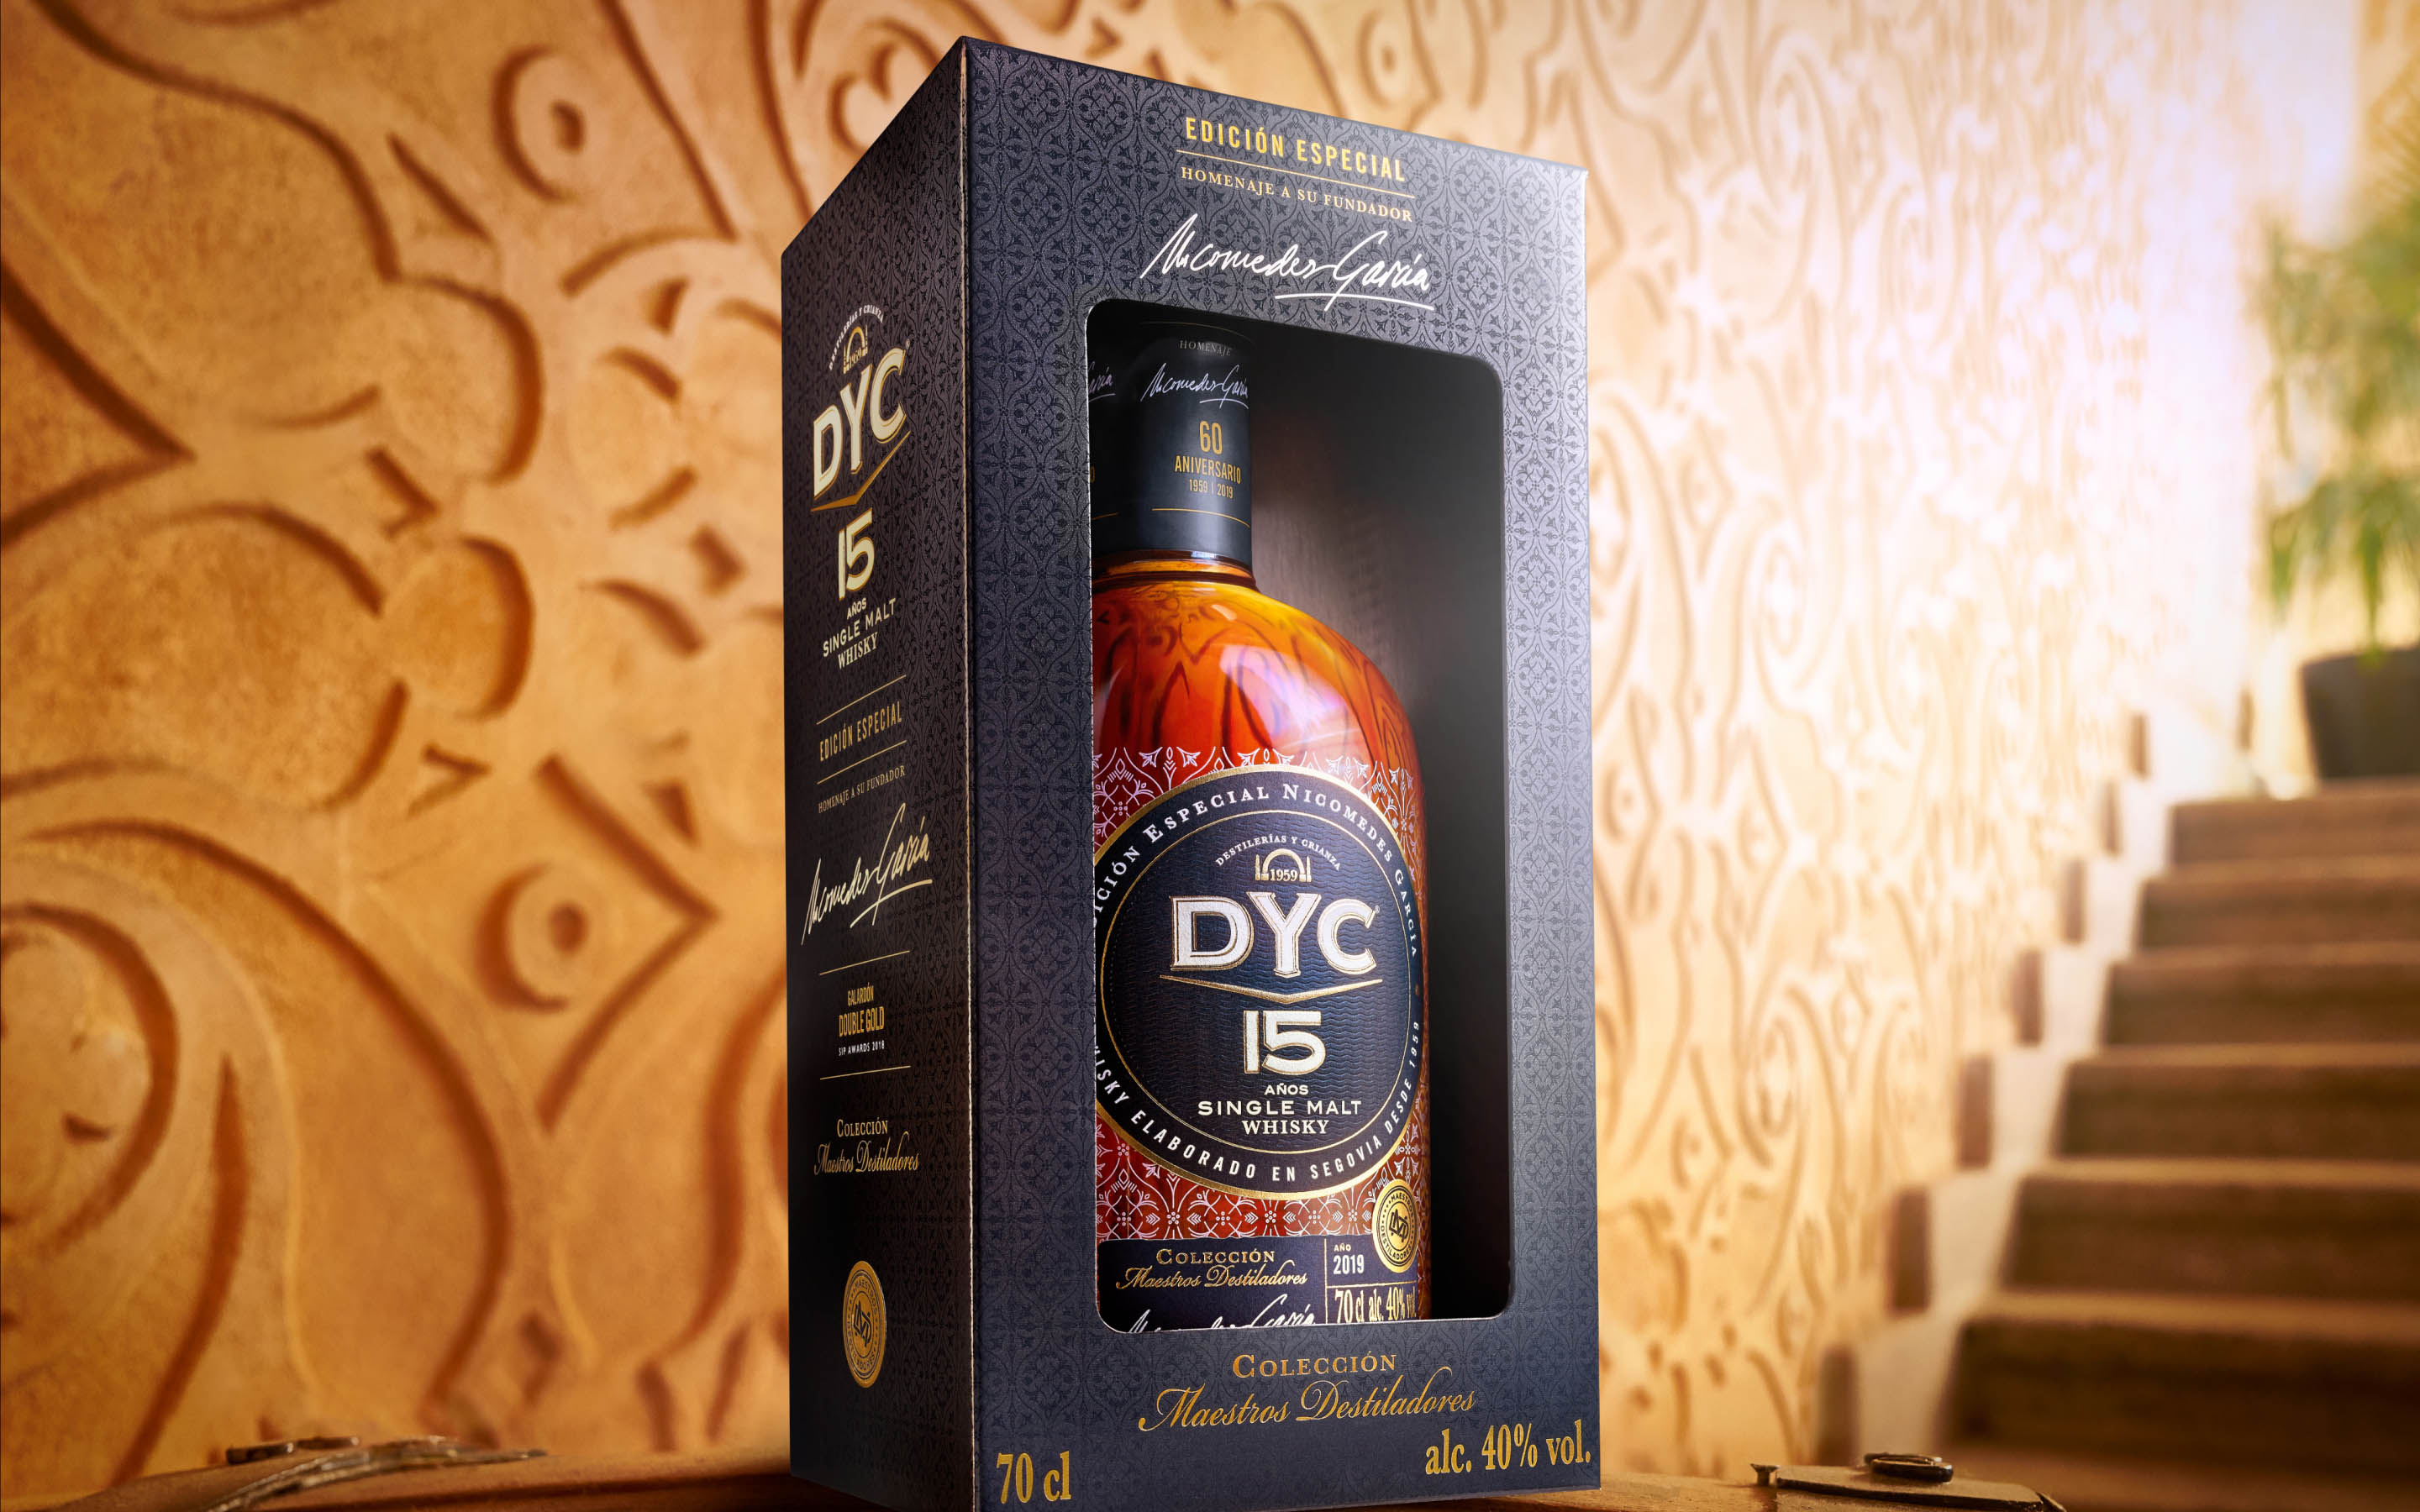 Originally from Segovia, DYC has been making top quality whiskies since 1959, characterized by a unique and nuanced flavour achieved through extensive experience, passion and a meticulous distillation process.
